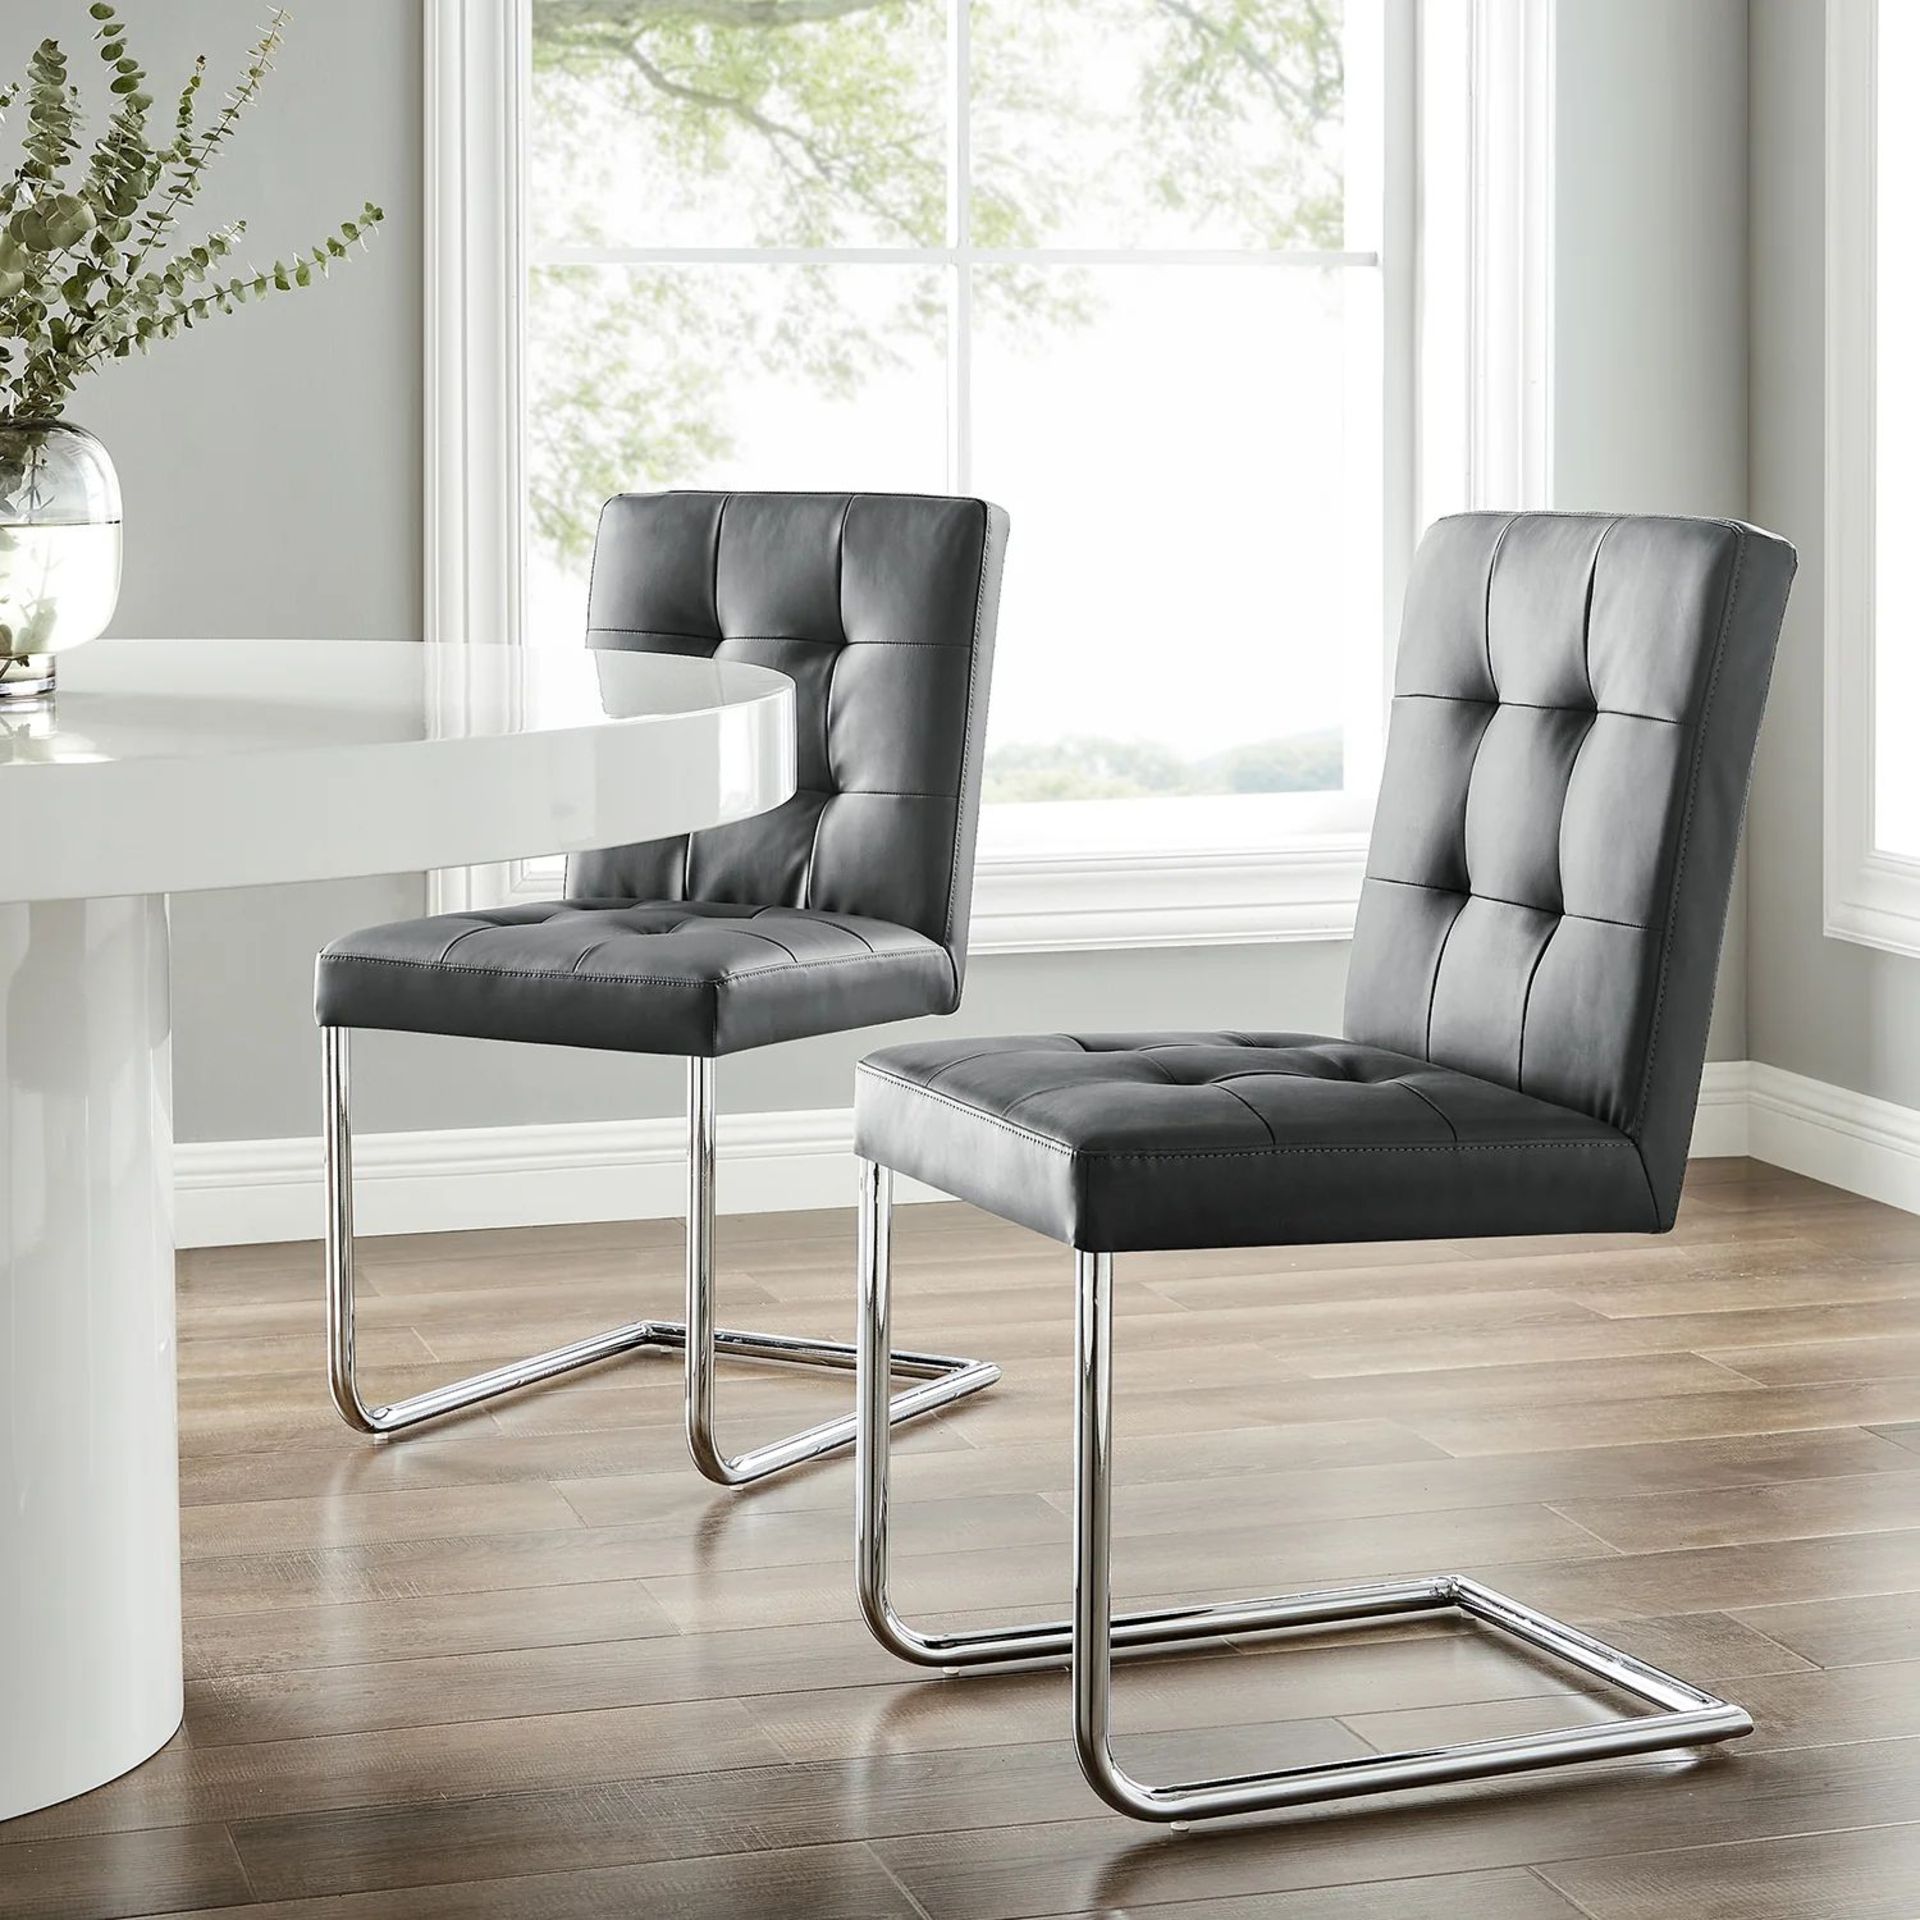 Keyston Set of 2 Dark Grey PU Leather Upholstered Dining Chairs with Chrome Legs. - R19.5. RRP £